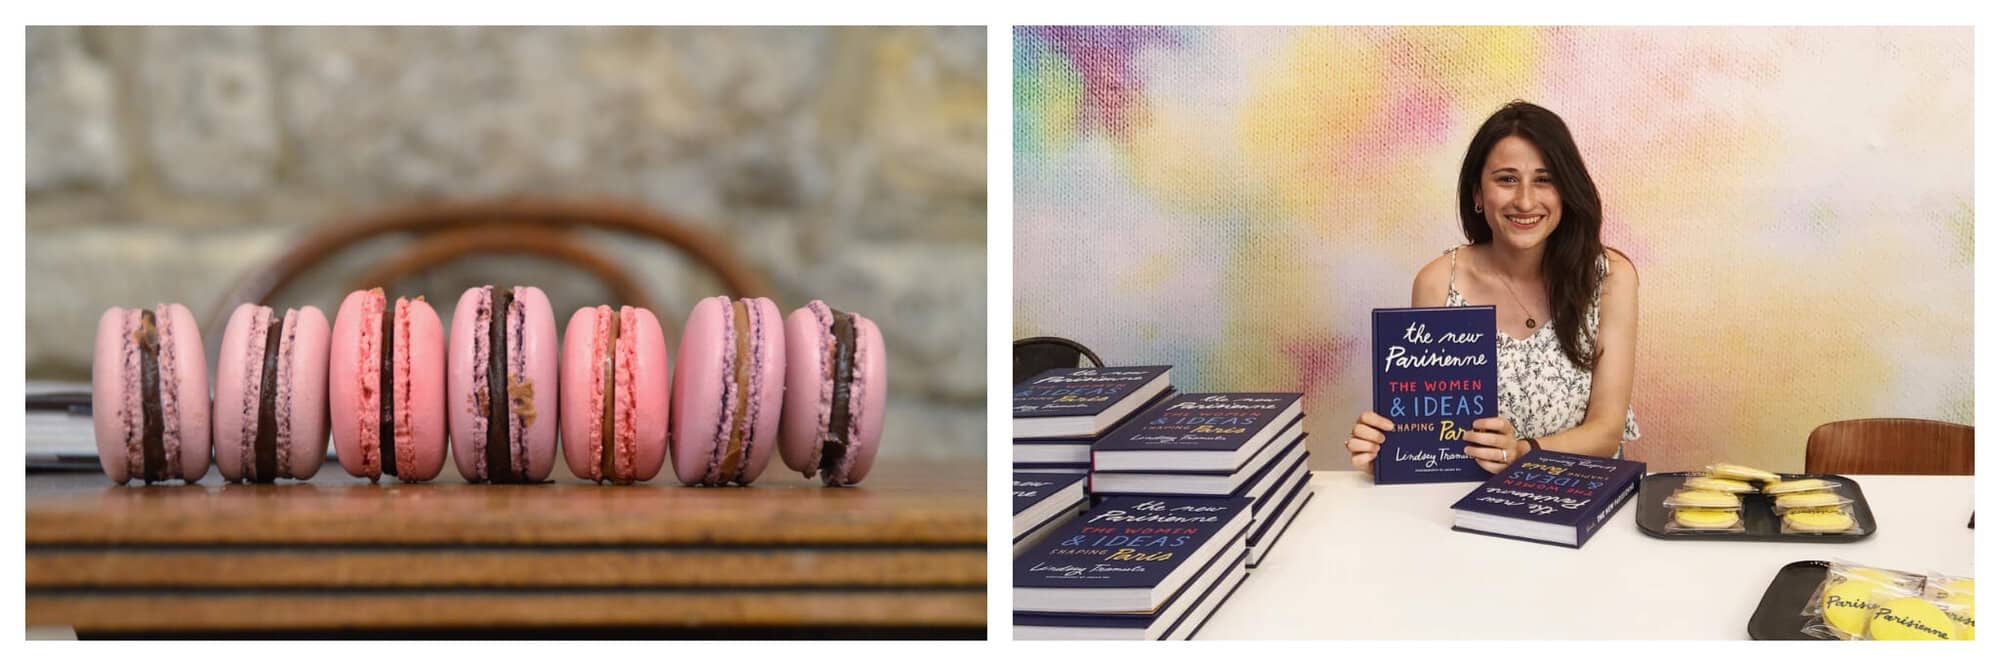 Left: a row of pink and purple macarons by La Cuisine Paris. Right: Lindsey Tramuta with her book 'The New Parisienne'. 